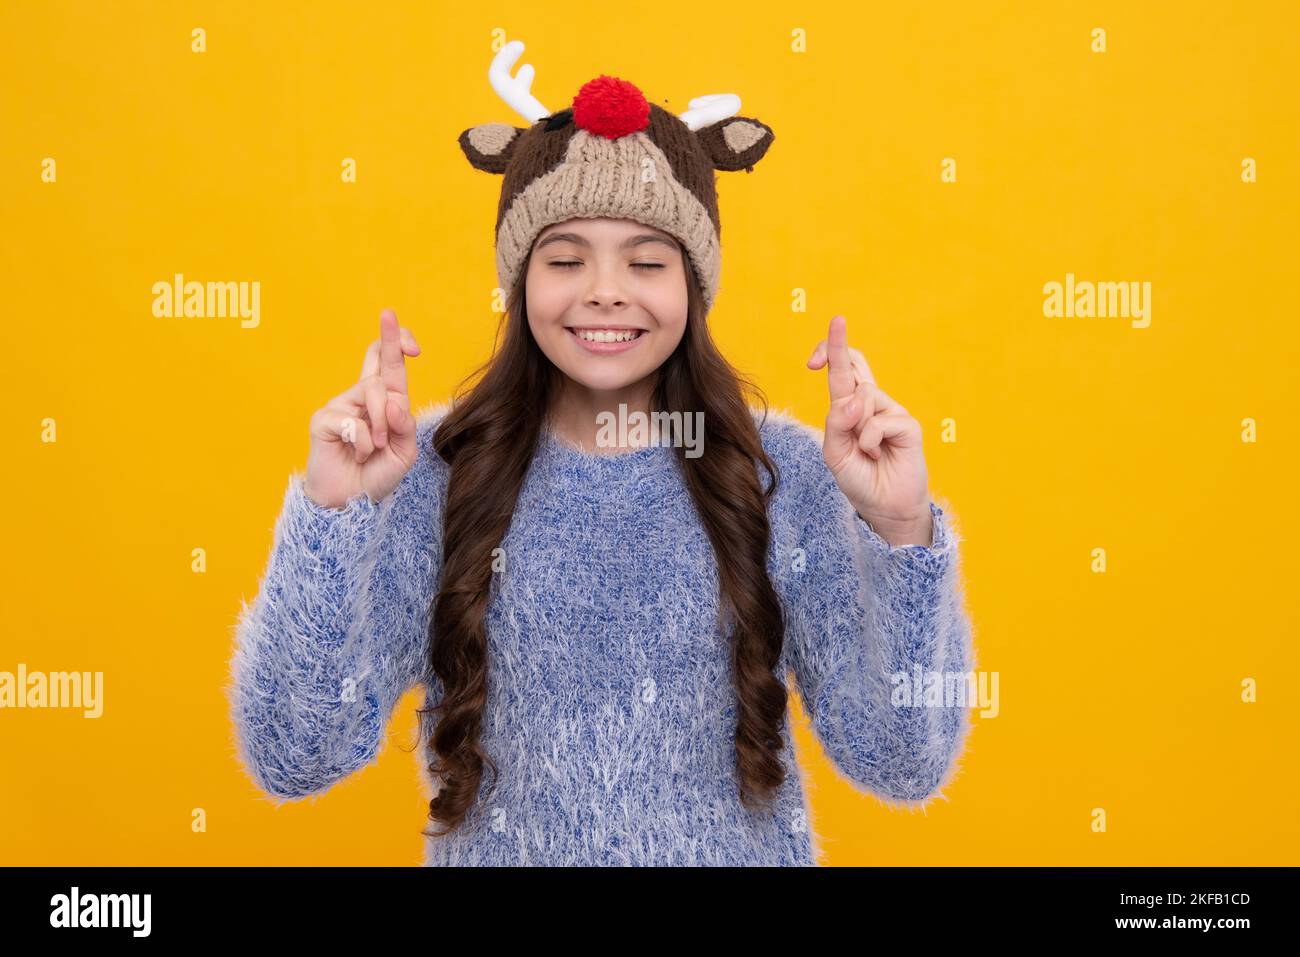 Beautiful winter kids portrait. Teenager girl posing with winter sweater and knit hat on yellow background. Stock Photo